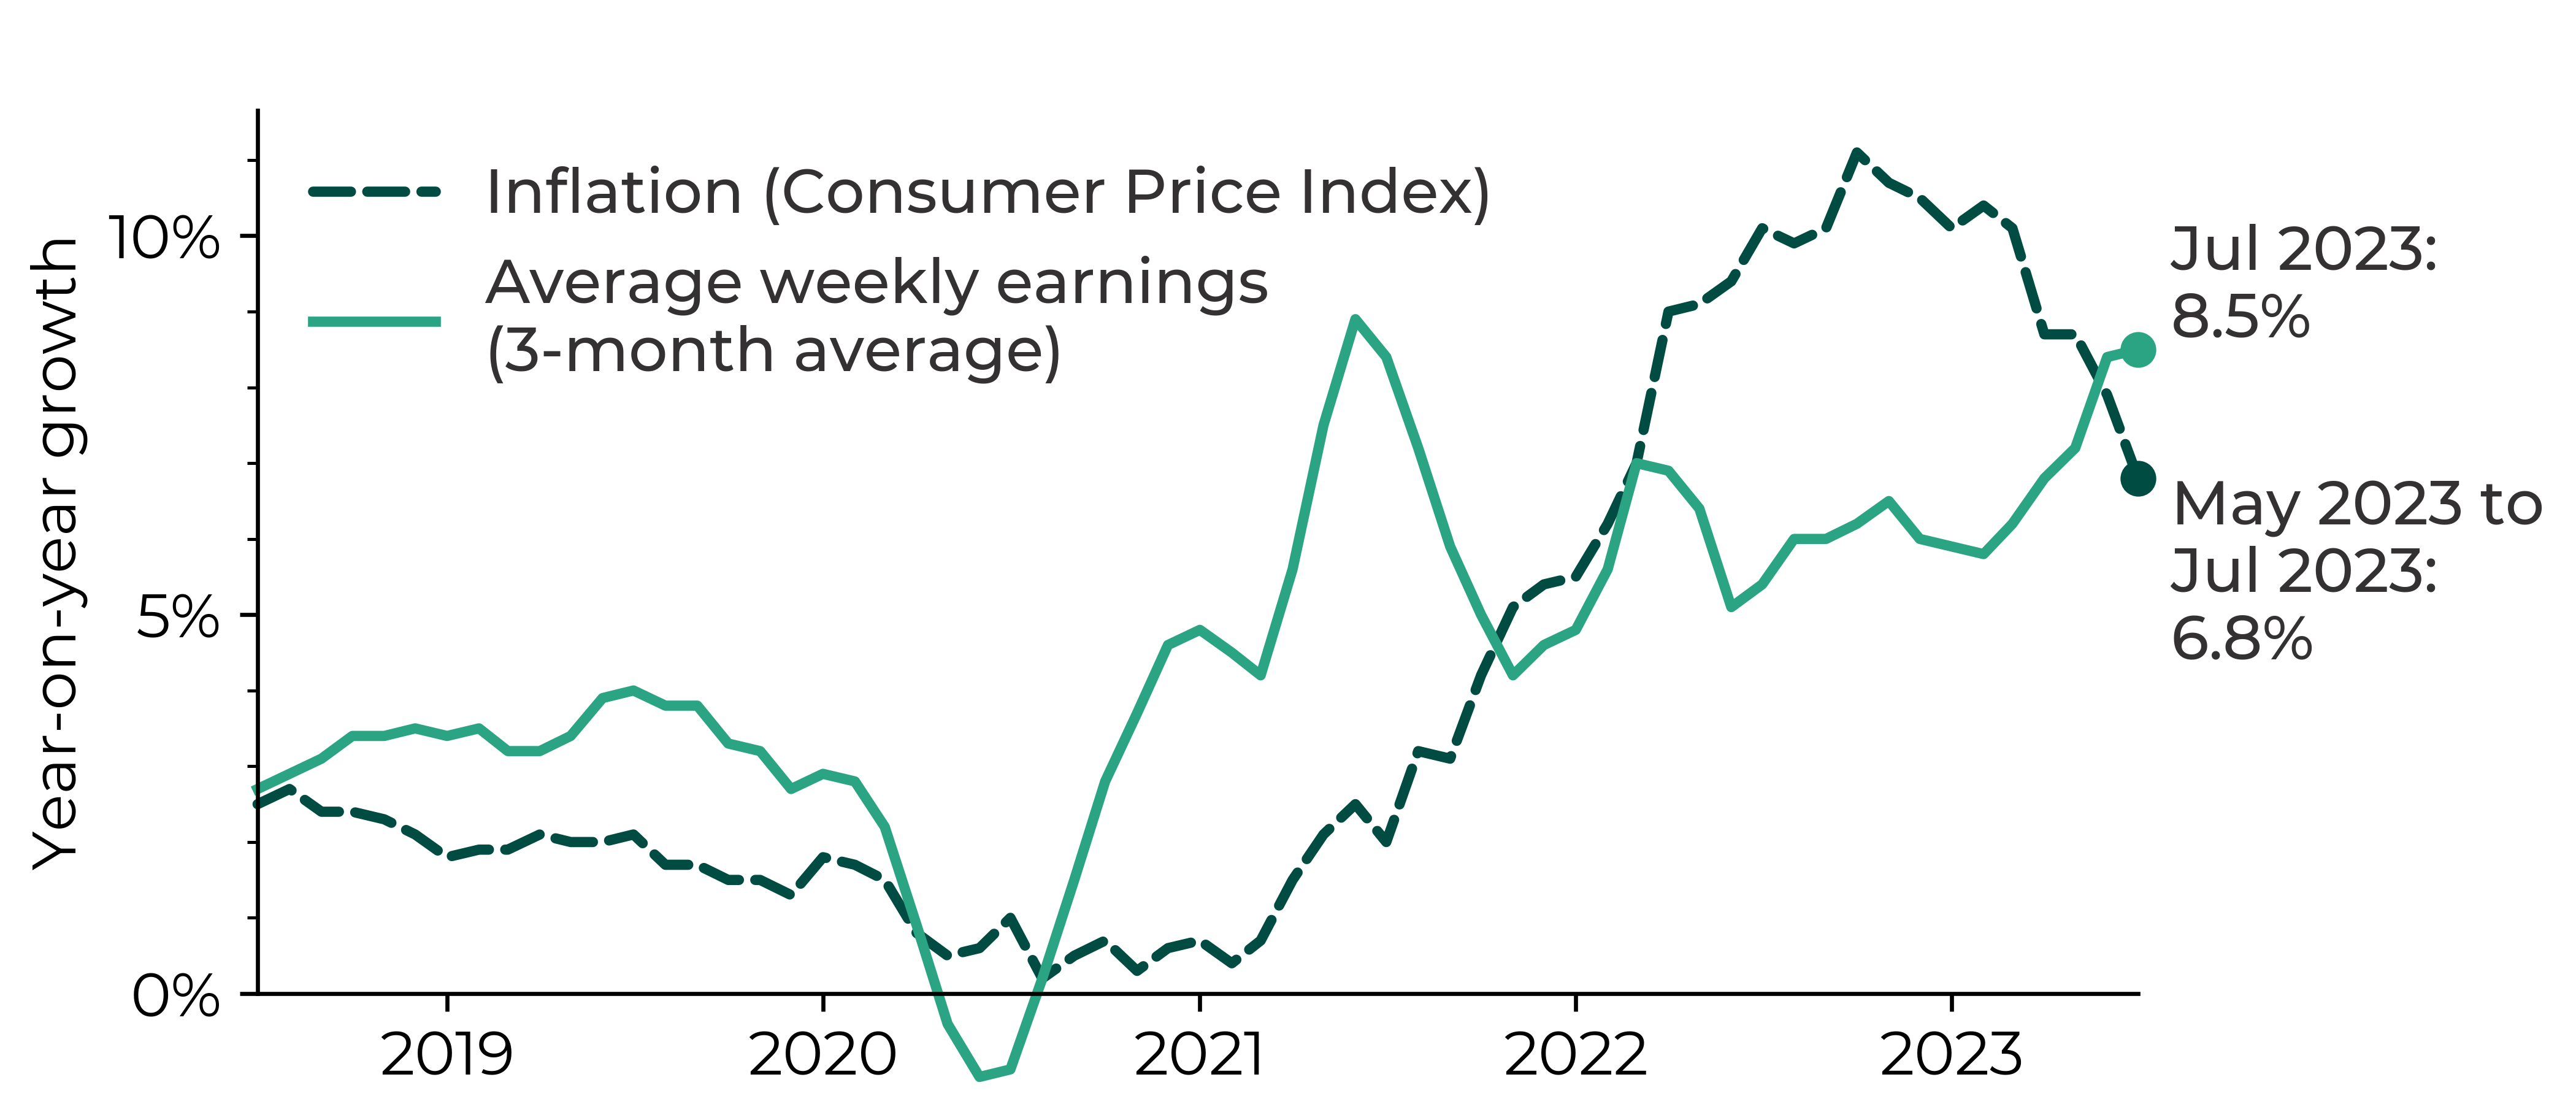 Graph showing UK inflation exceeding average weekly earnings (3-month average) in 2022-23. In July 2023, the average weekly earnings were 8.5% higher than for July 2022 whereas the Consumer Price Index inflation was at 6.8%.